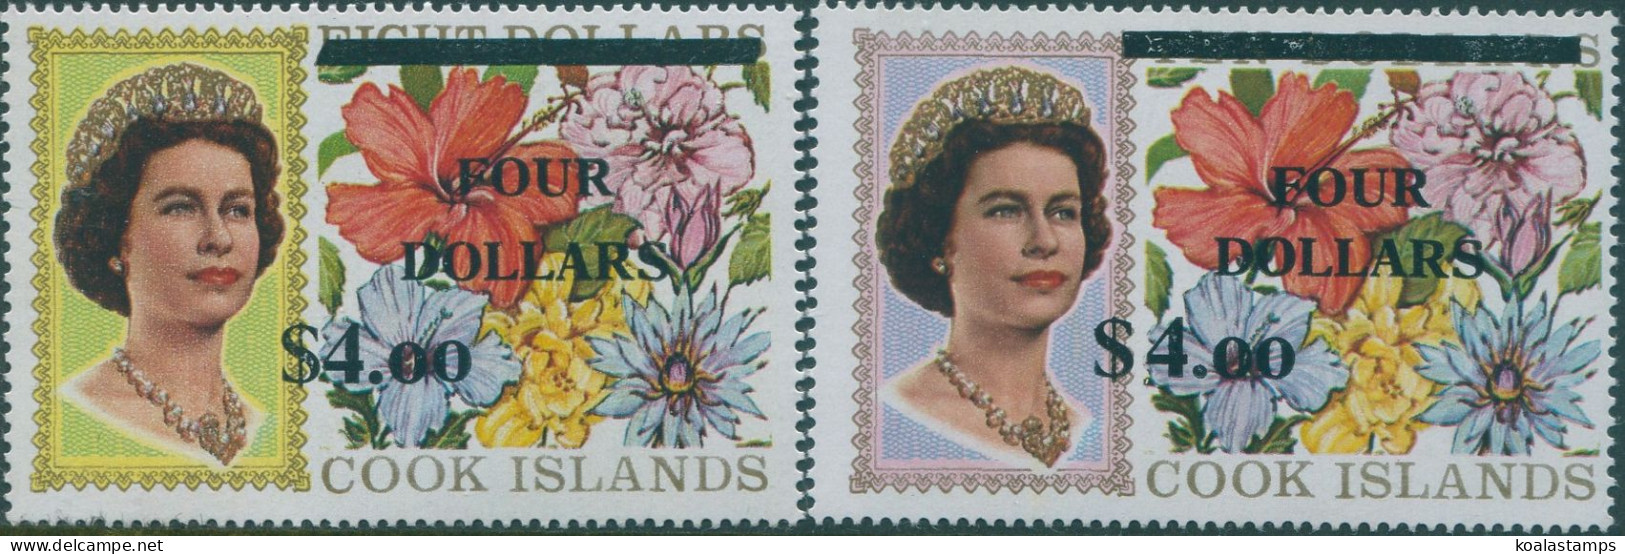 Cook Islands 1970 SG335-336 $4 Surcharges QEII Flowers Set MNH - Cook